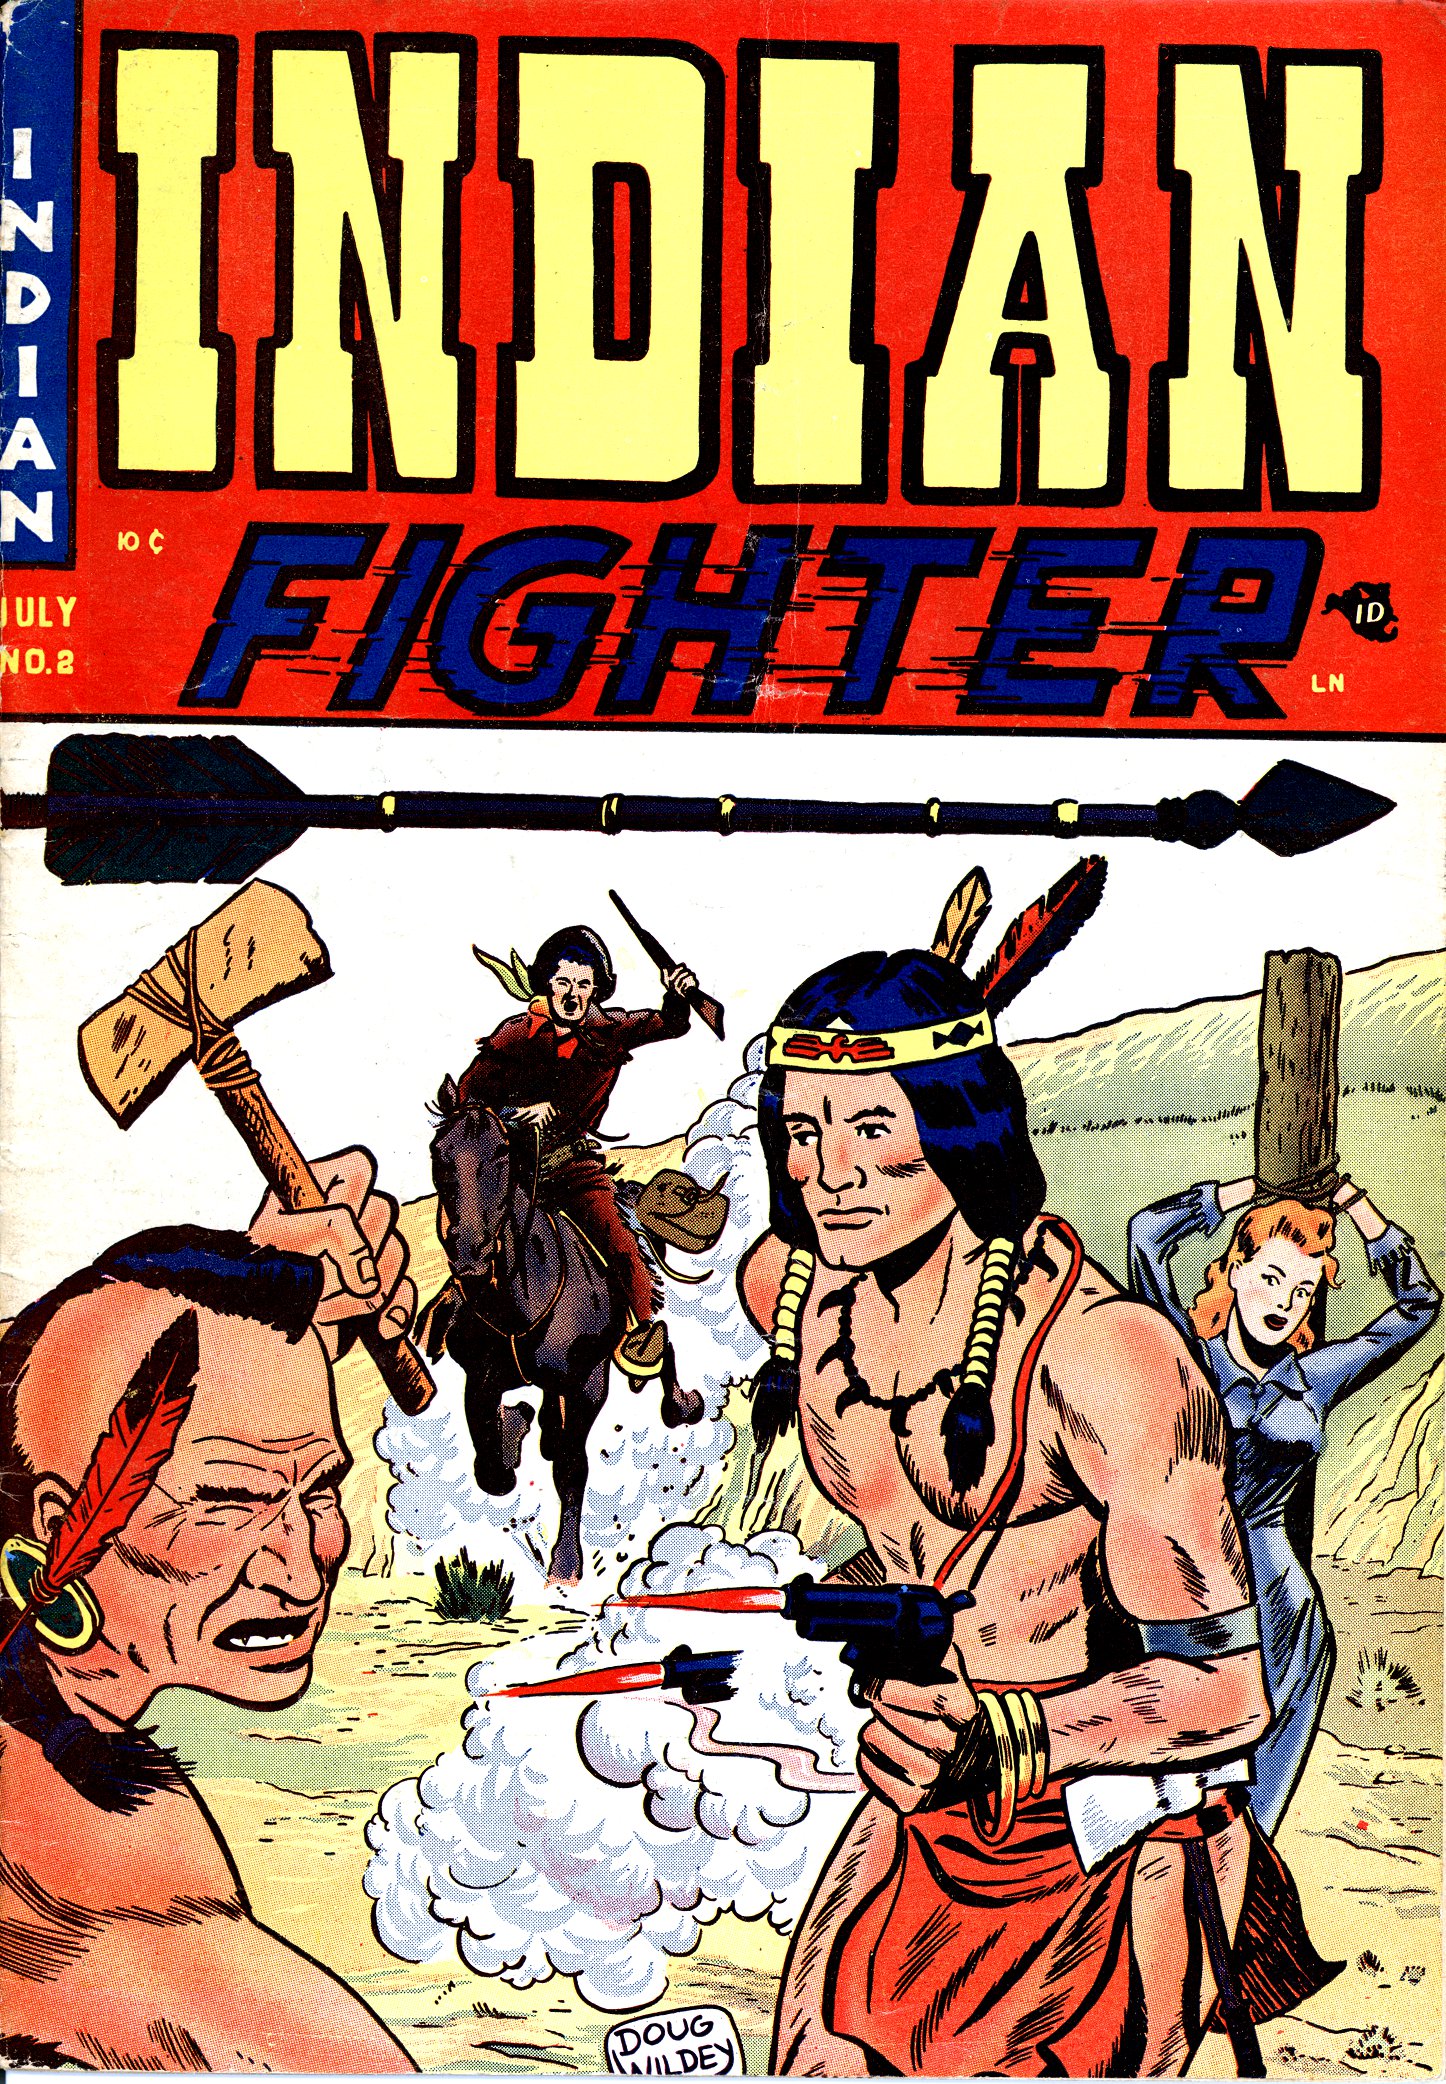 Read online Indian Fighter comic -  Issue #2 - 1